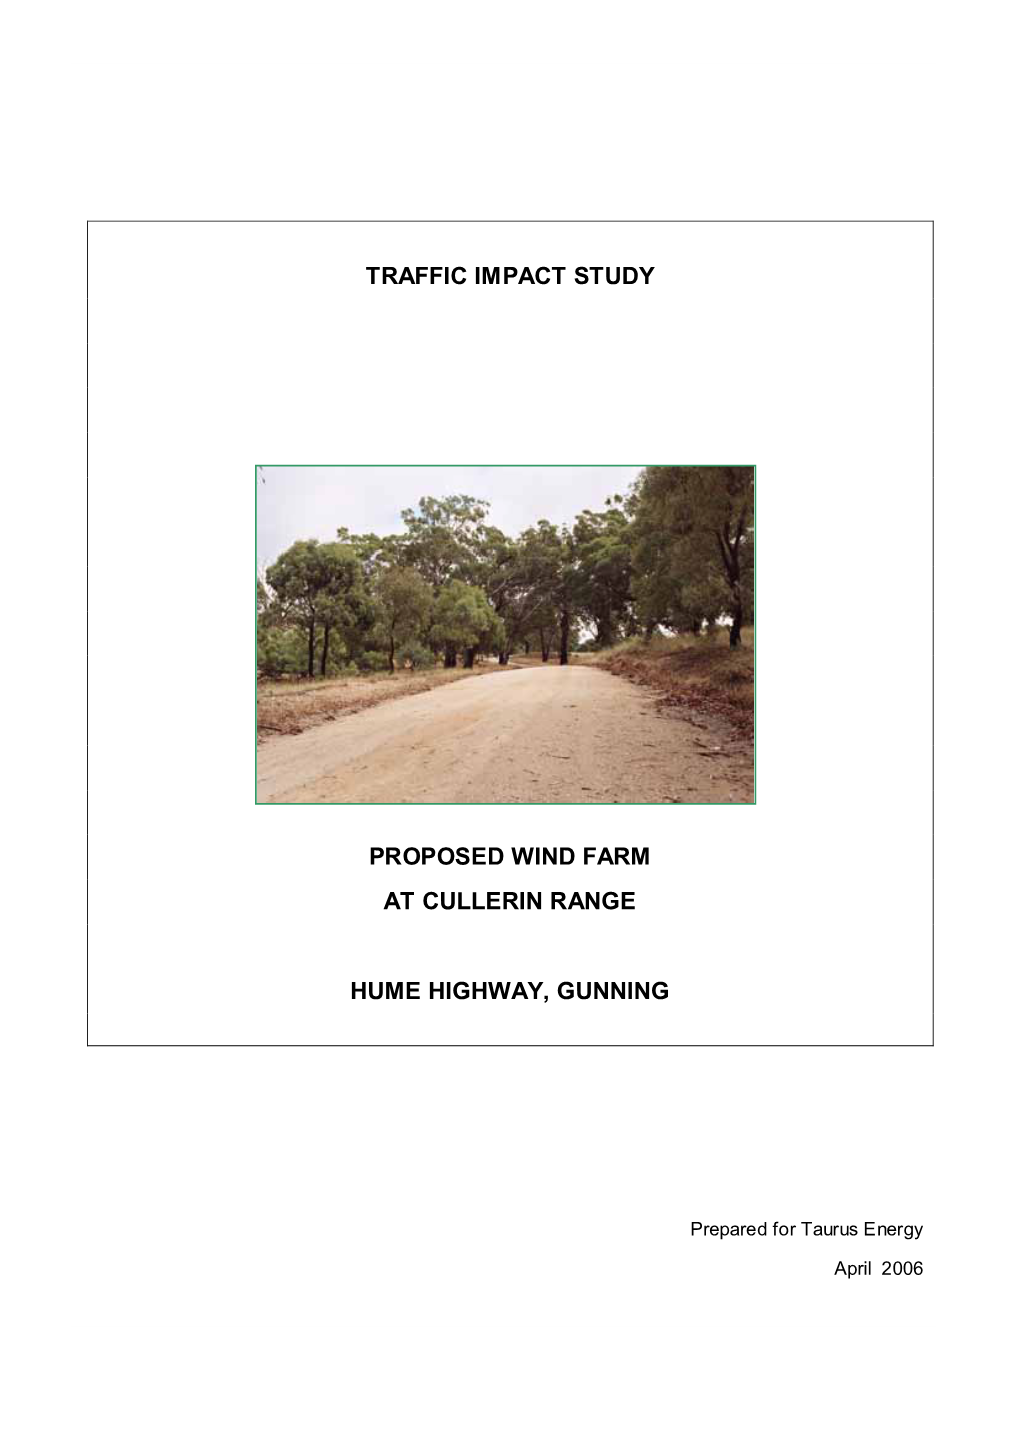 Traffic Impact Study Proposed Wind Farm at Cullerin Range Hume